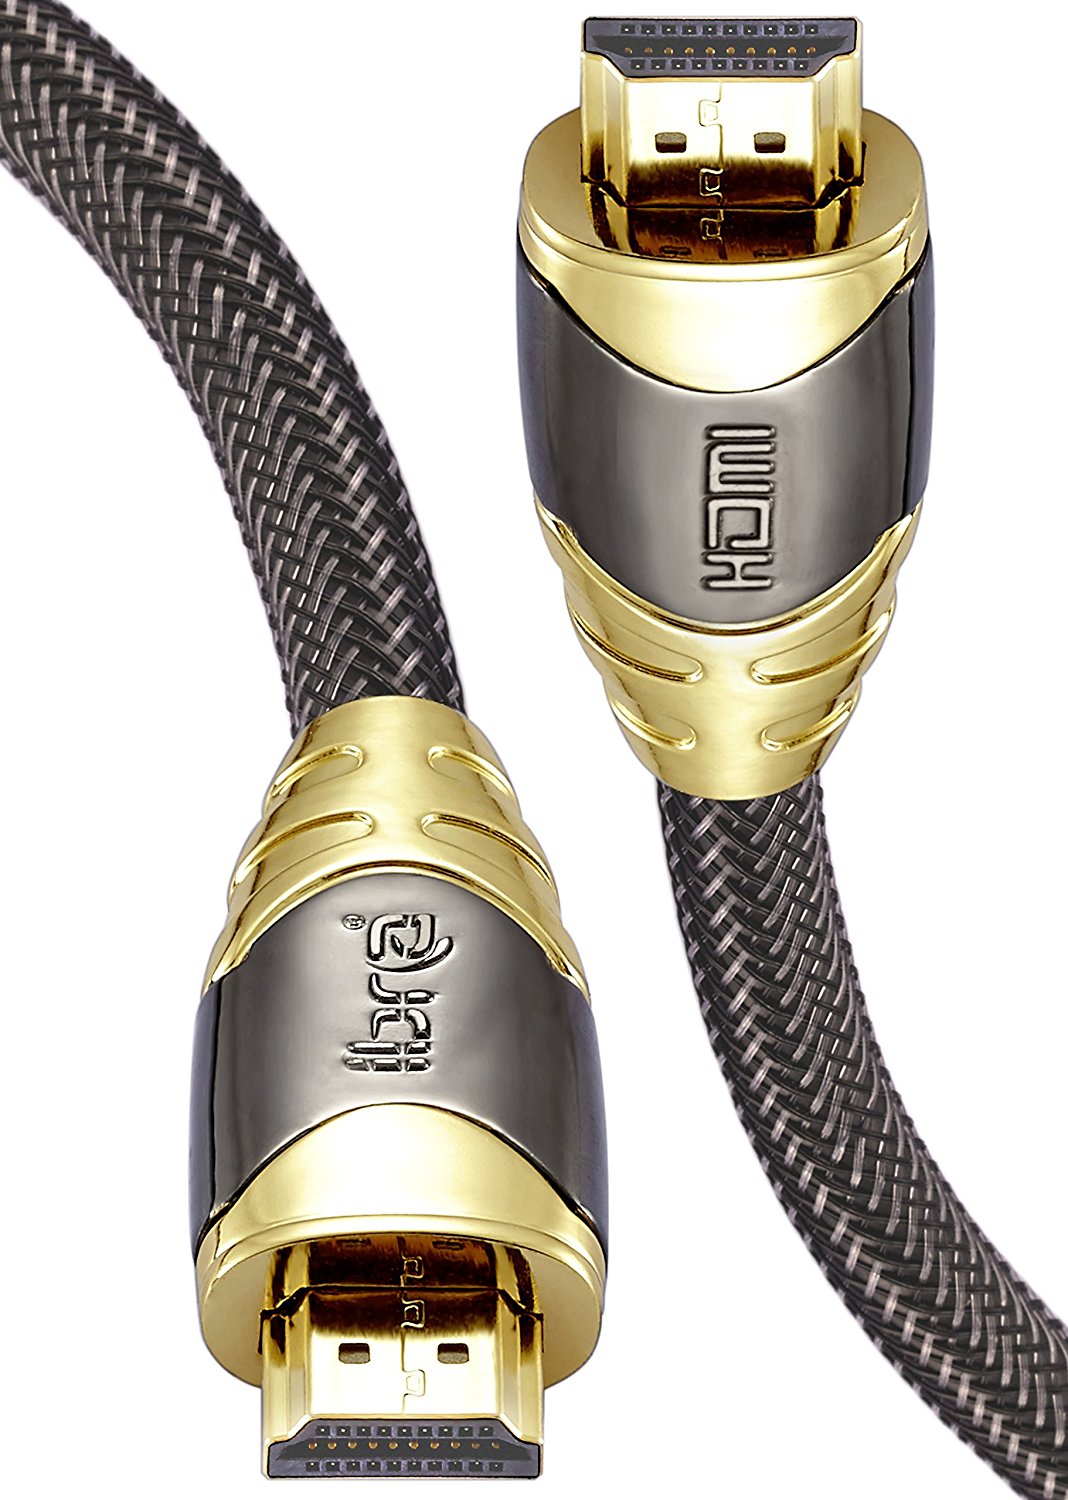 HDMI Cable 0.75M - HDMI 2.0 (4K@60Hz) Ready - 28AWG Braided Cord - 18Gbps -Gold Plated Connectors - Ethernet, Audio Return - Video 4K 2160p HD 1080p 3D Xbox PlayStation PS3 PS4 PC Apple TV – IBRA LUXURY